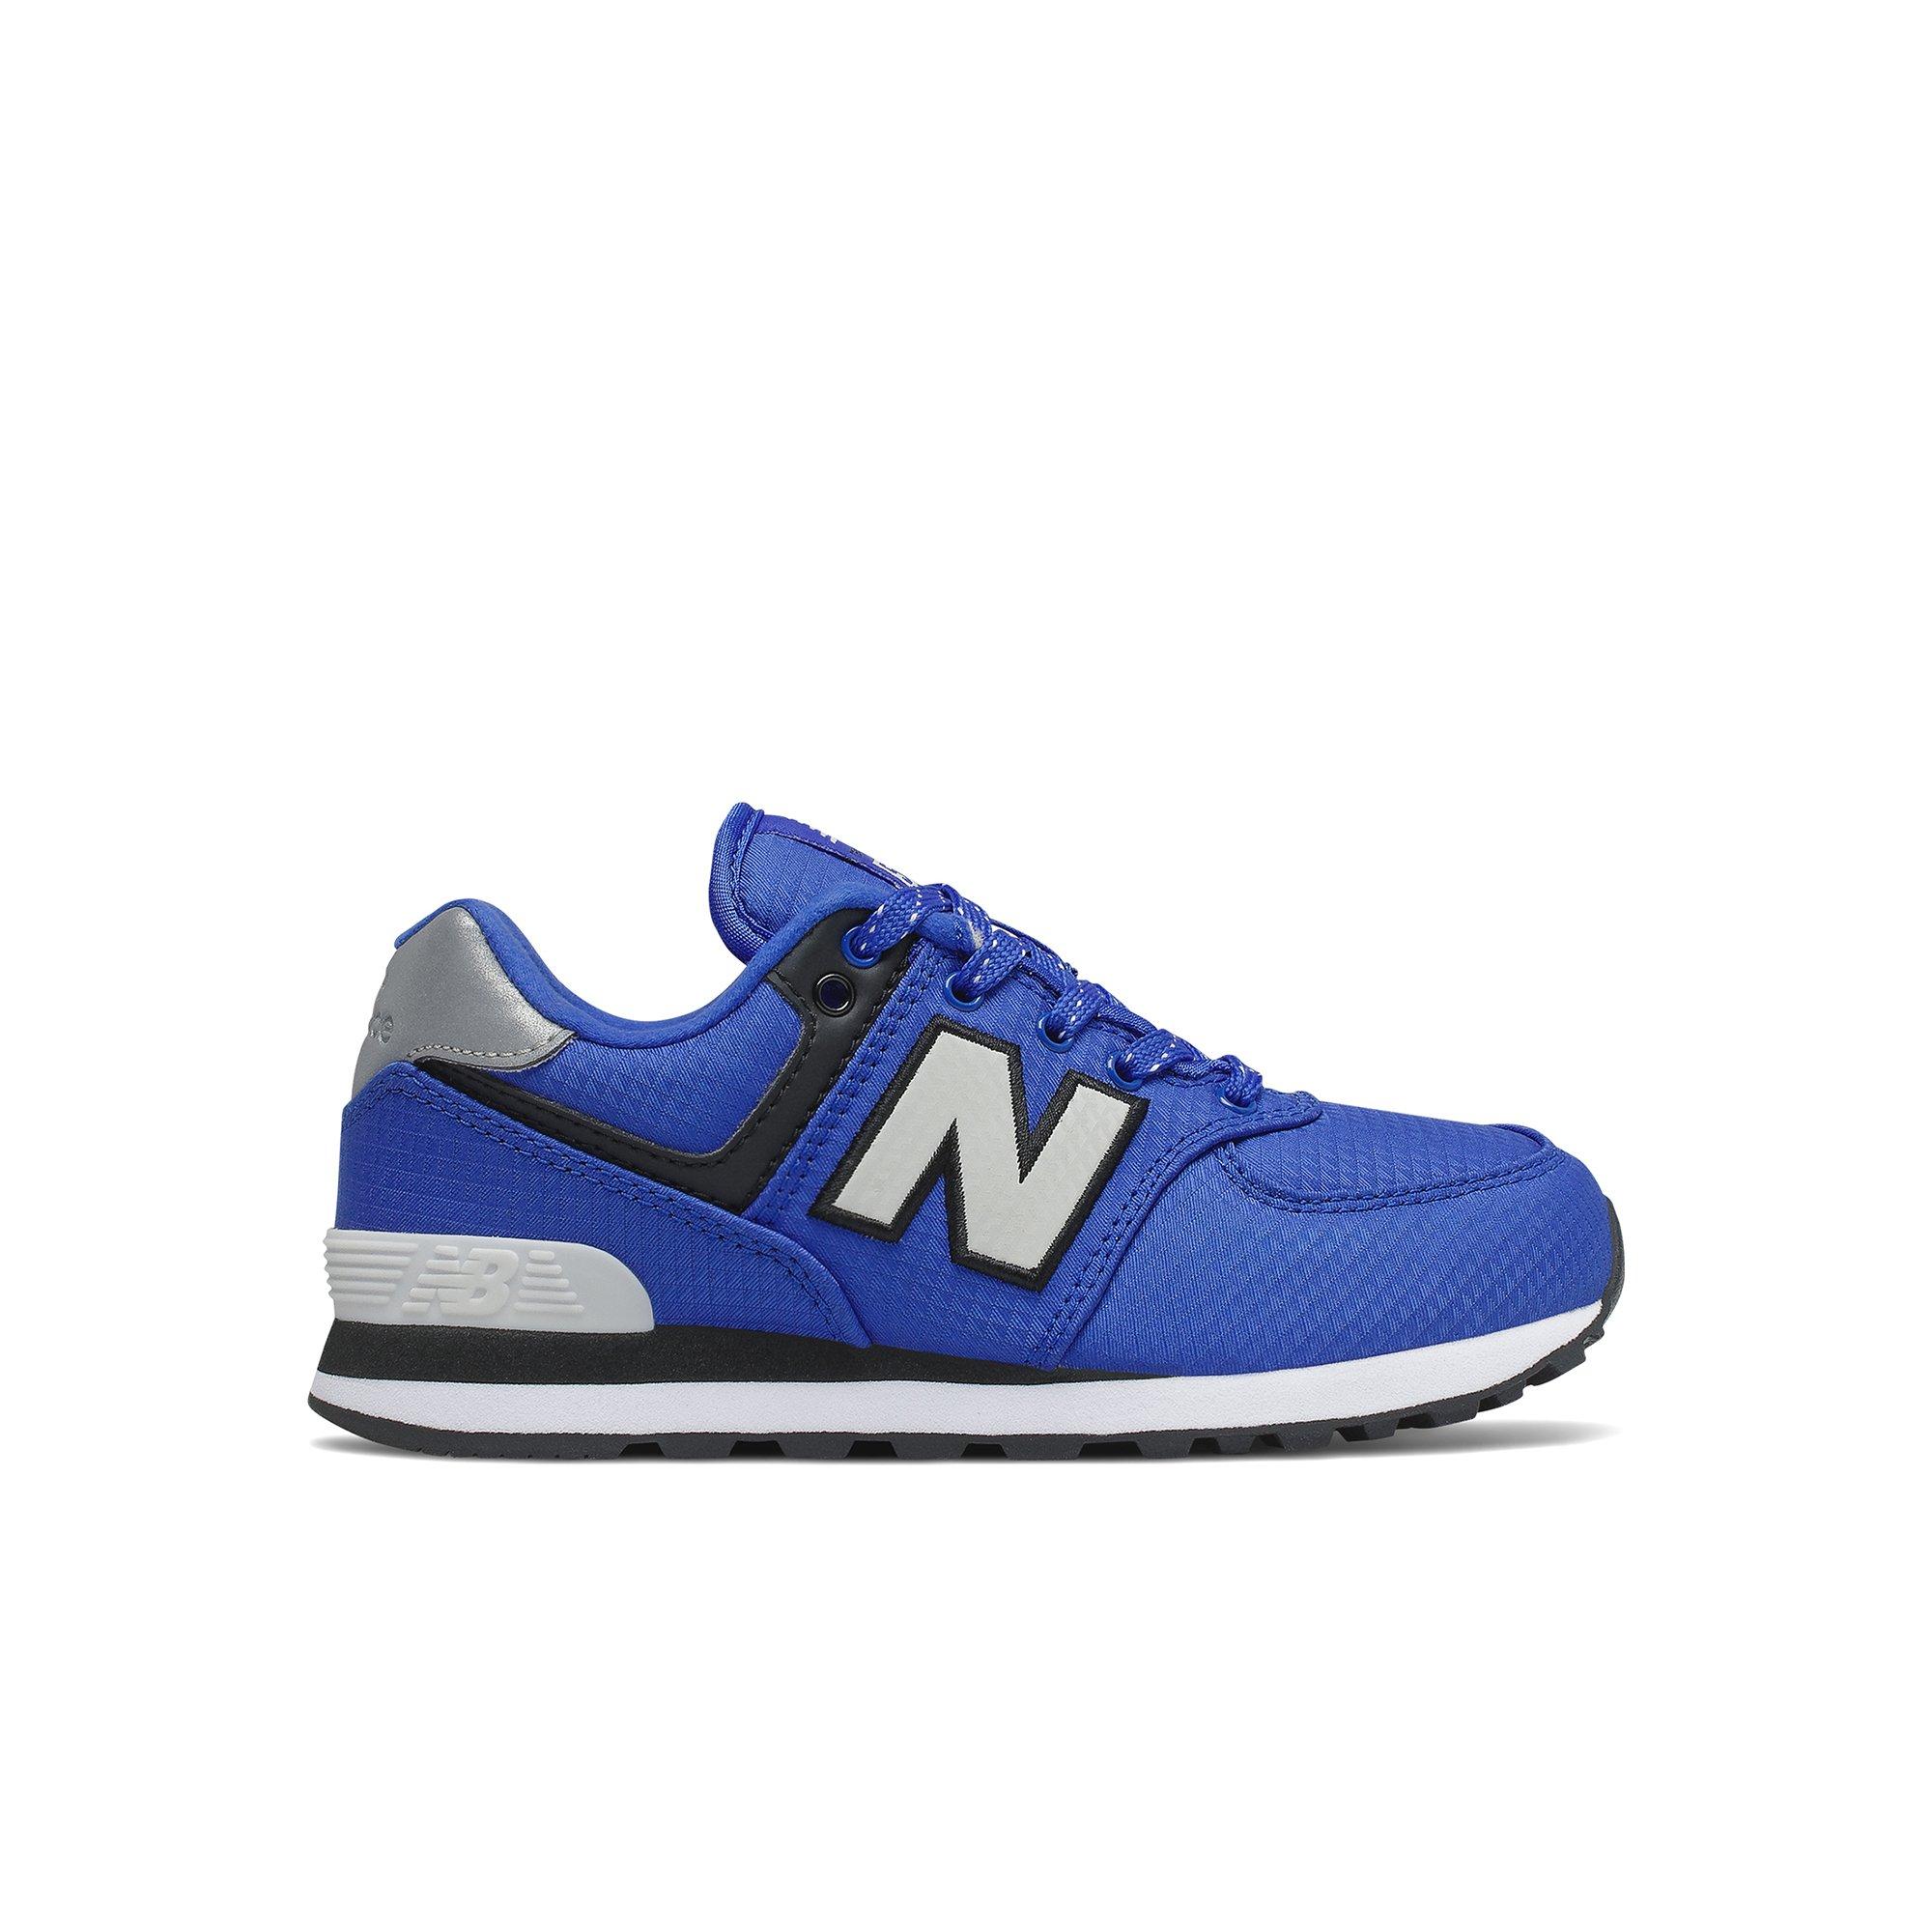 New Balance | Shoes, Sneakers, Cleats 